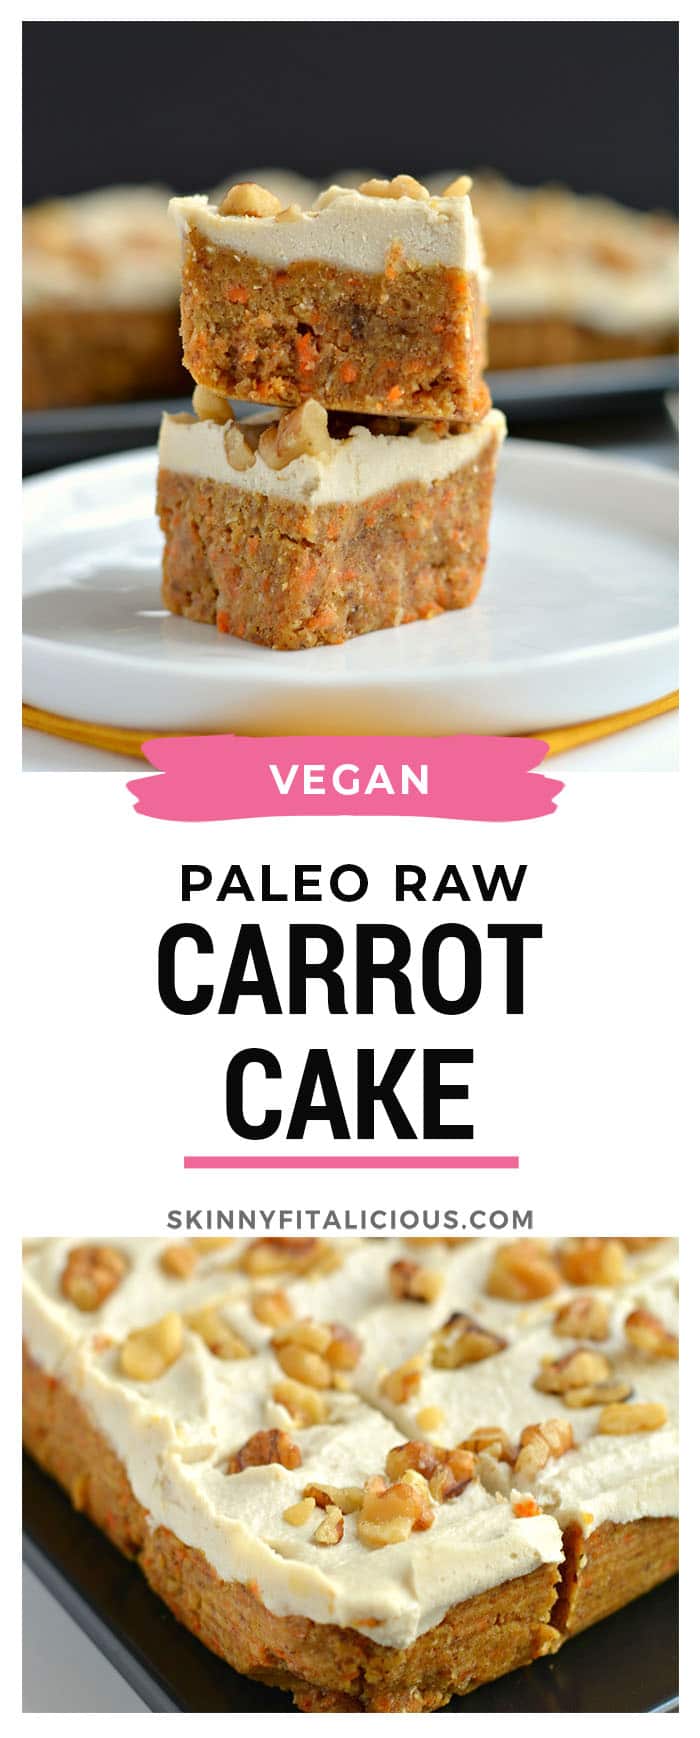 Paleo Raw Carrot Cake is a spin on a traditional favorite! Made with a carrot, date and walnut base, this delicious cake is topped with a silky cashew maple coconut icing that's surprisingly healthy and good for you. This is what carrot cake dreams are made of!  Paleo + Gluten Free + Vegan + Low Calorie